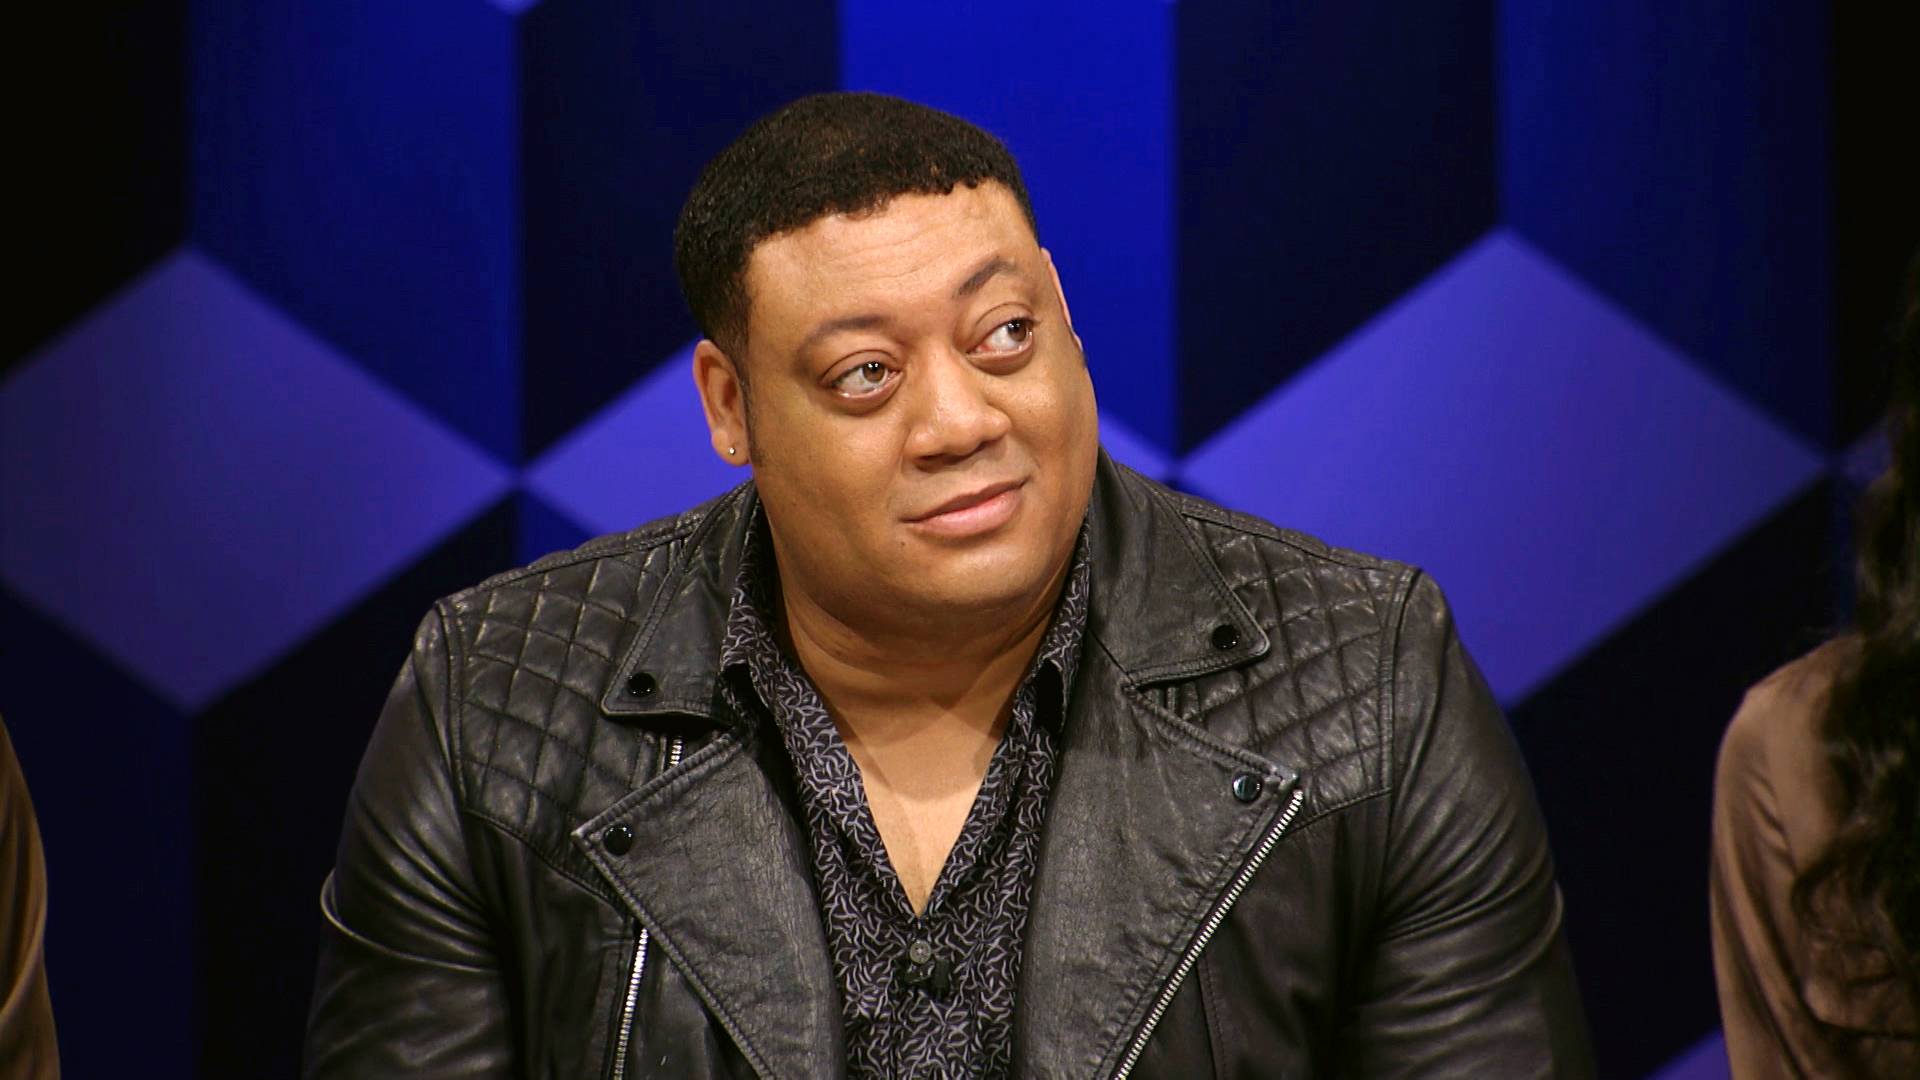 Comedian/actor Cedric Yarbrough on episode 112 of BET's New game show Face Value.